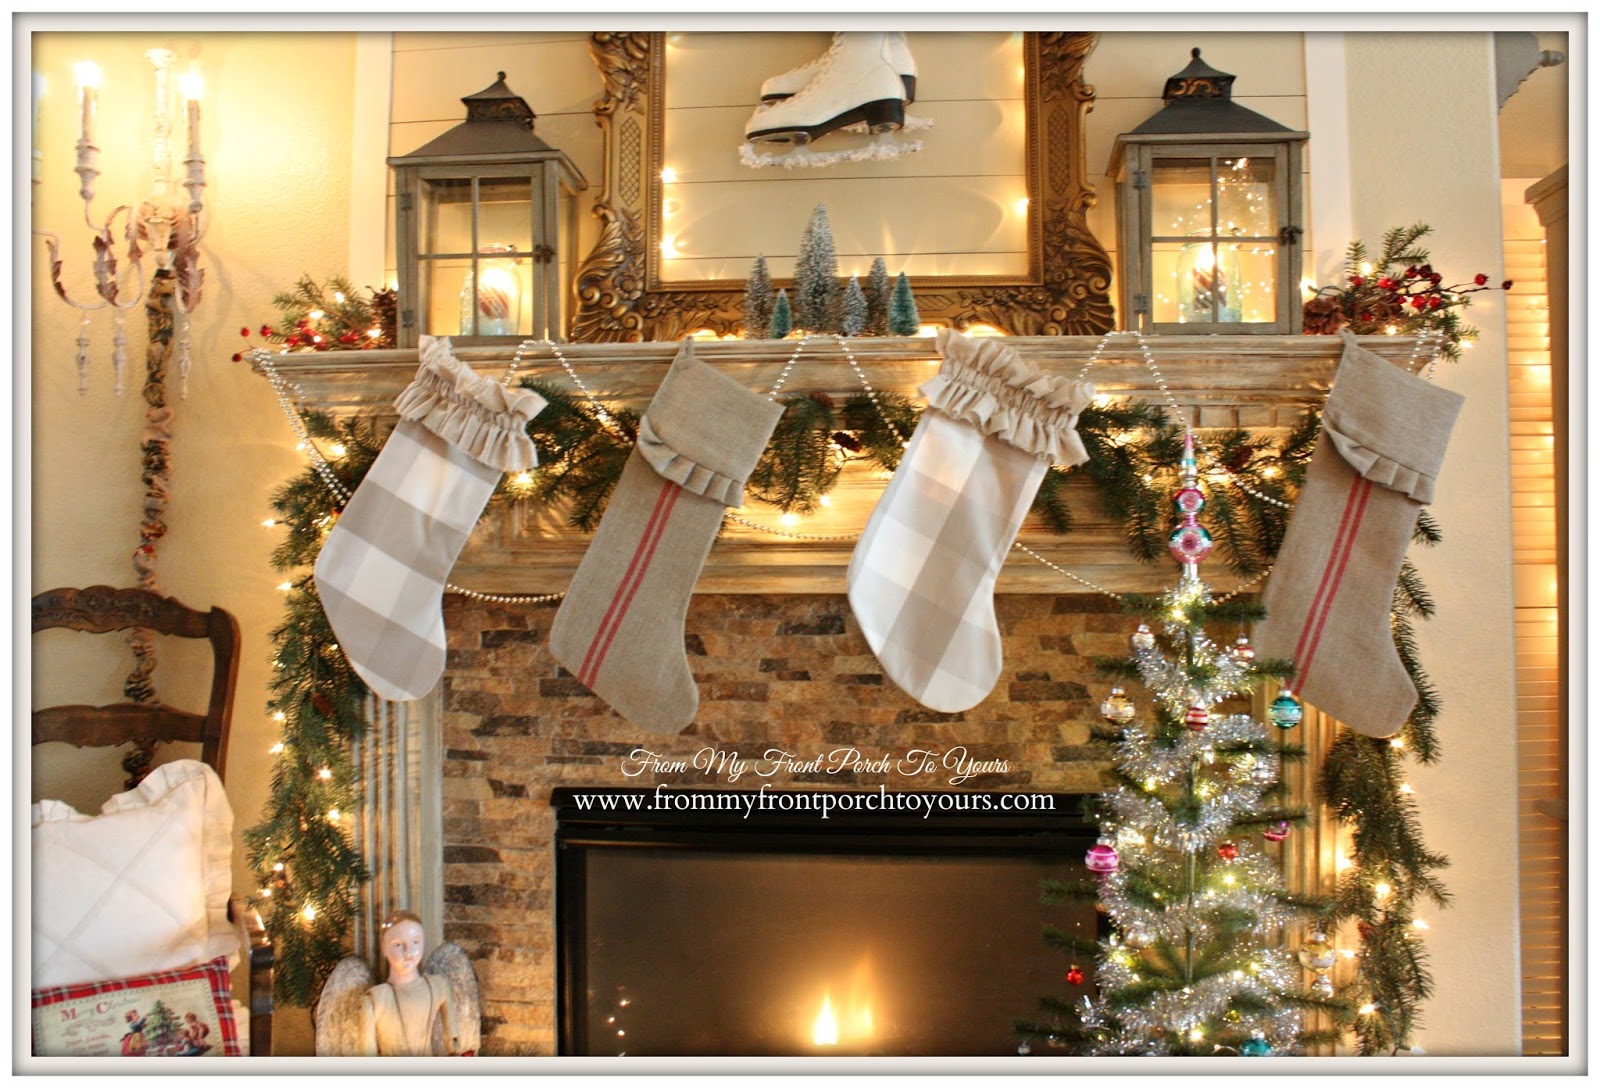 Grain Sack Christmas Stockings-DIY Buffalo Check Christmas Stockings-French Farmhouse Vintage Christmas Mantel 2014- From My Front Porch To Yours